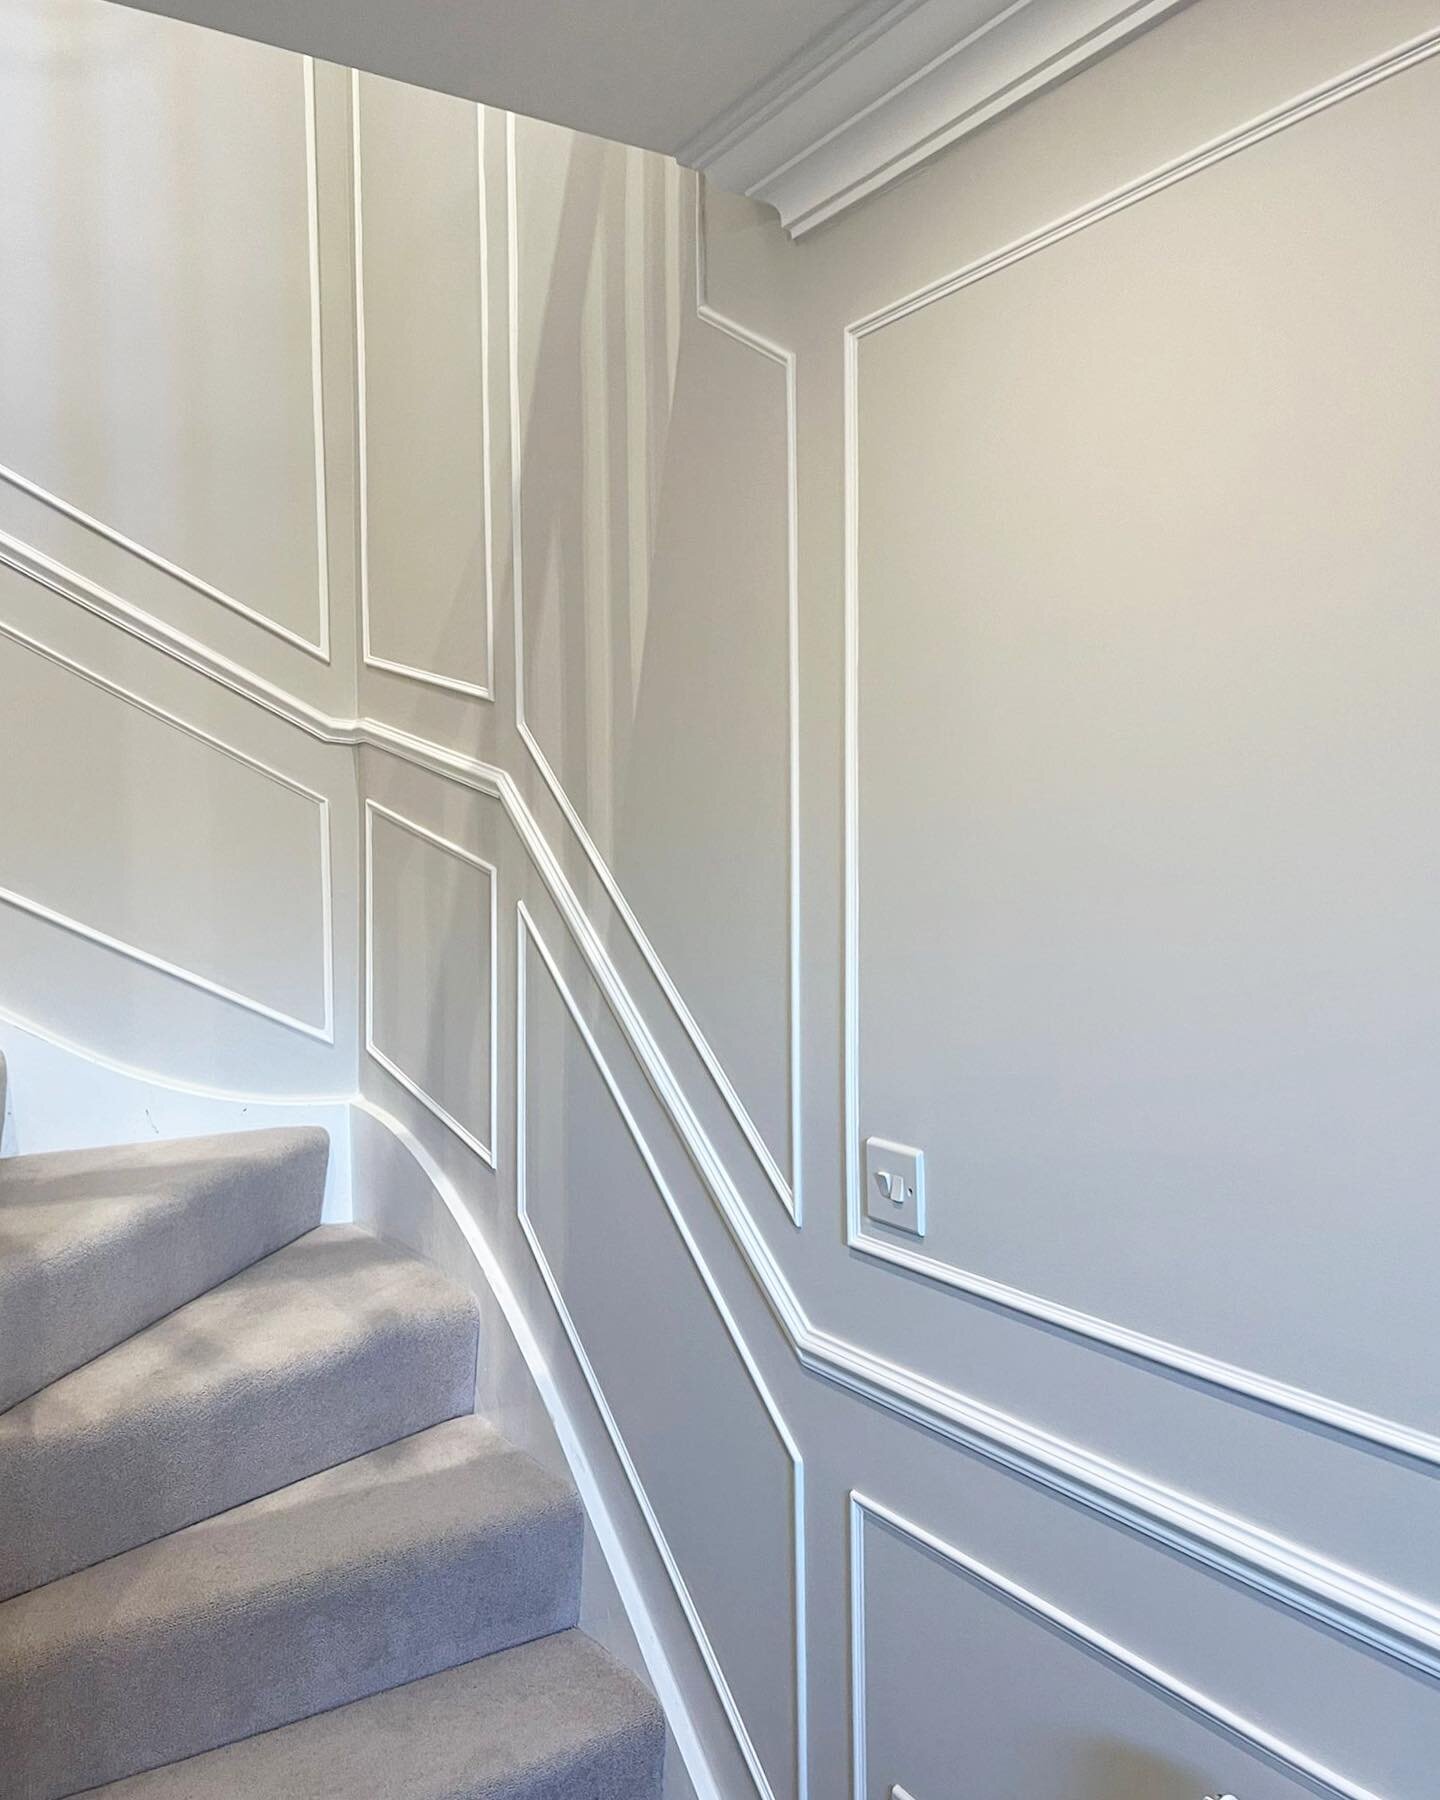 Decorative paneling evokes style and ambience to any interior&hellip; from the grandest of Victorian and Edwardian properties, to modern new builds. Swipe to see one of our latest jobs, with custom panelling made to measure on-site, and then finished